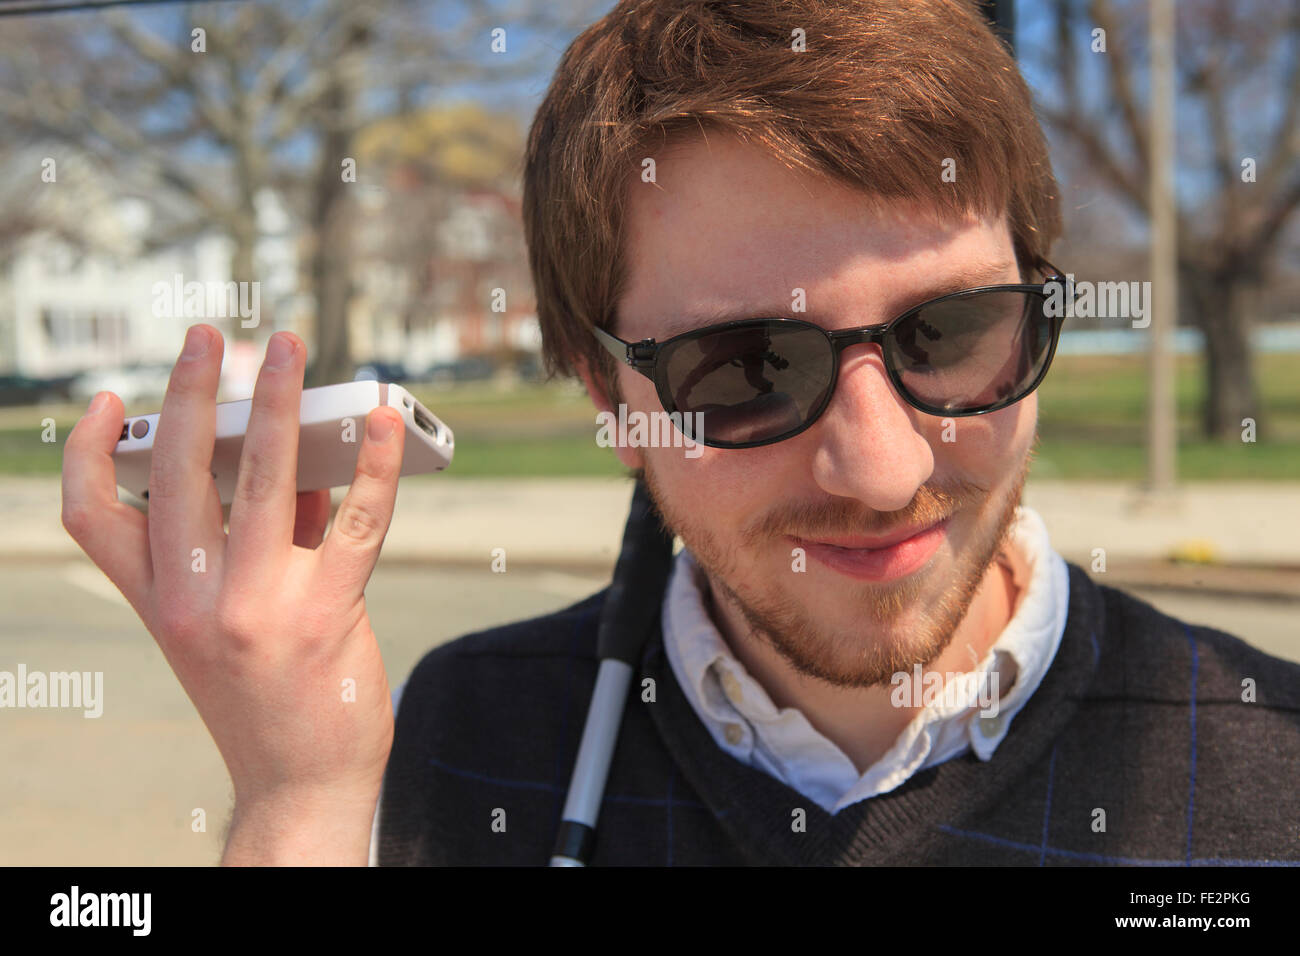 Young blind man in his neighborhood using assistive technology with his cell phone Stock Photo